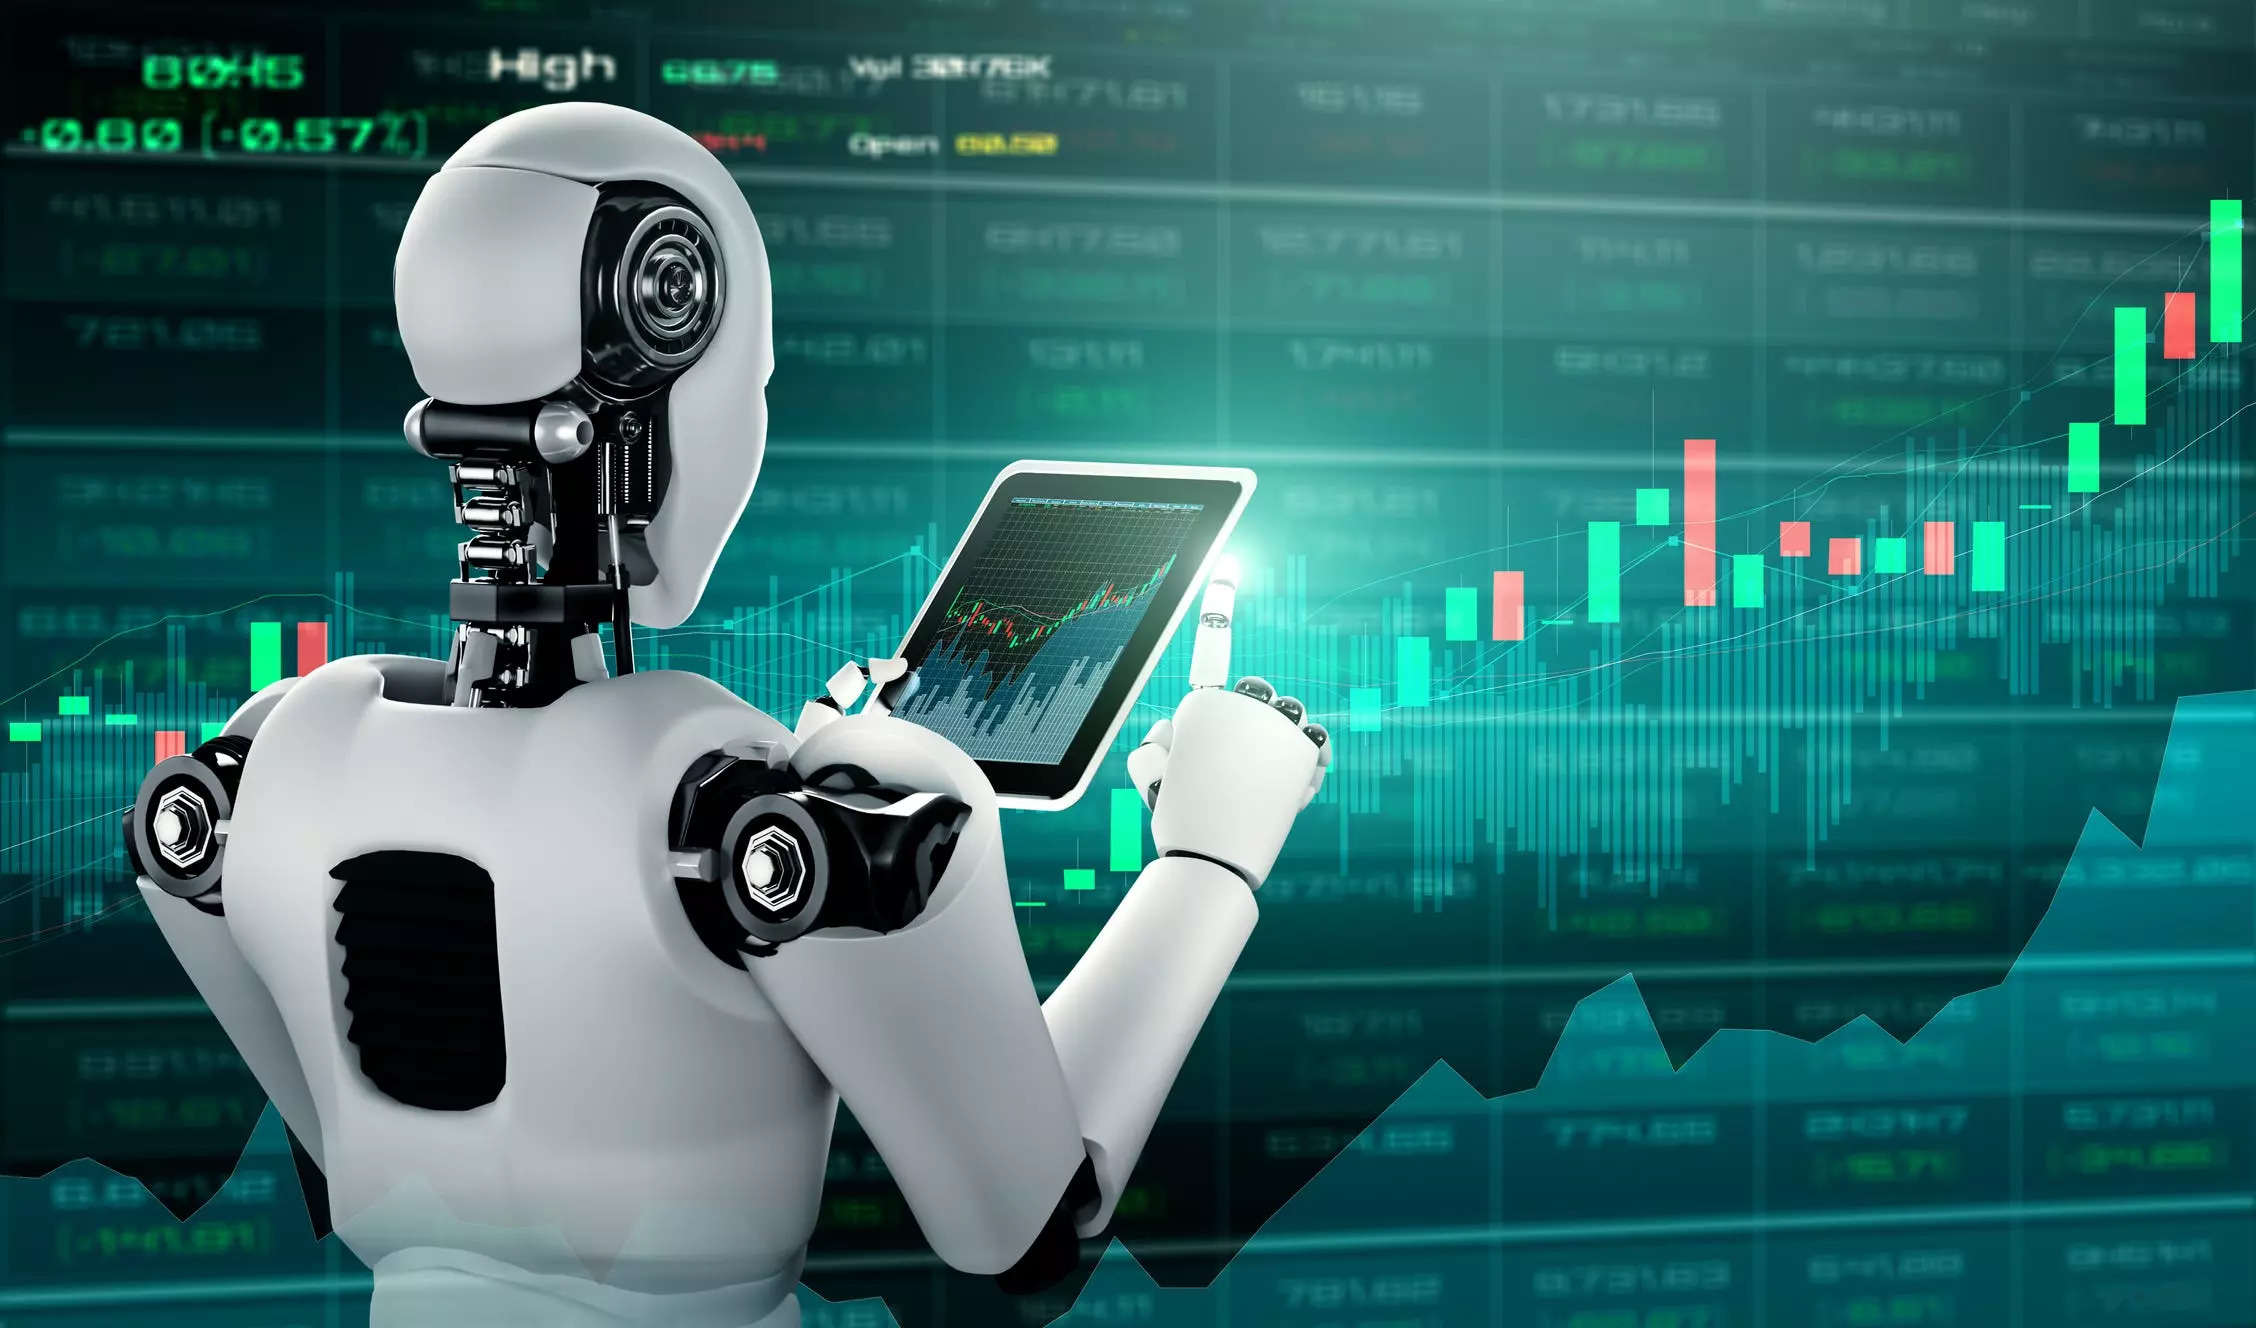 A 3D illustration of future financial technology controlled by AI robot using machine learning and artificial intelligence to analyze business data and give advice on investment and trading decisions.